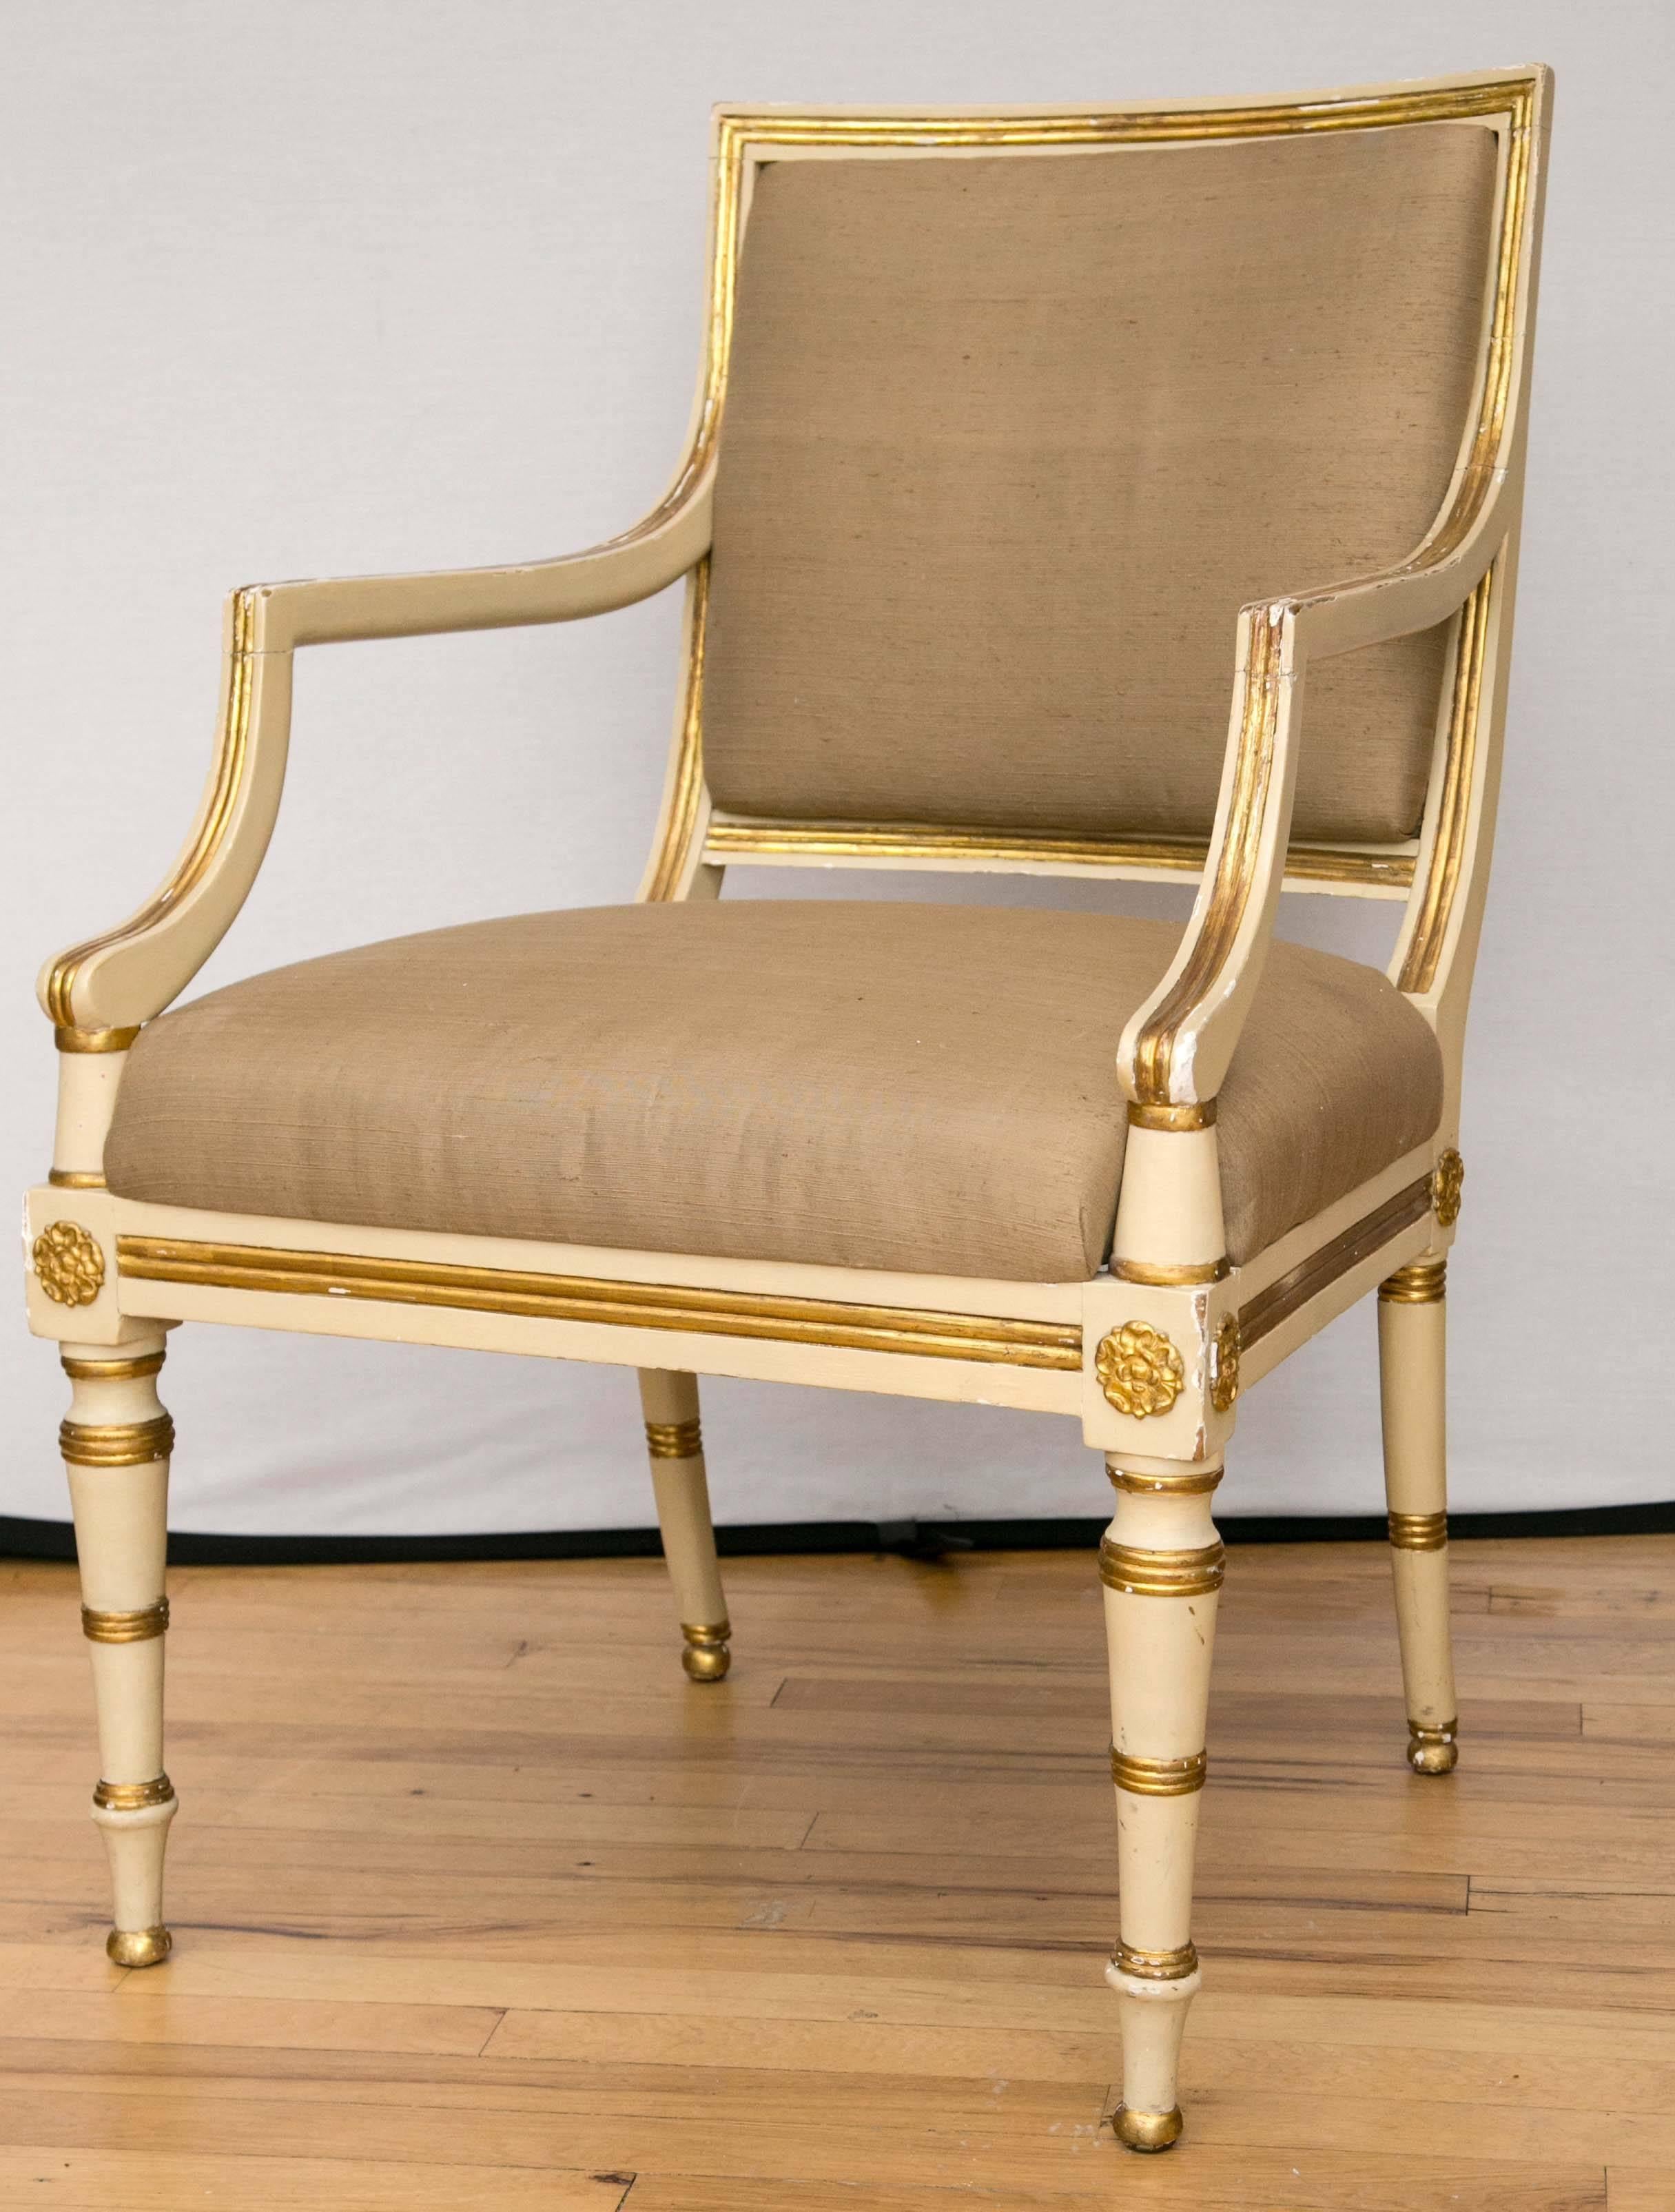 An elegant pair of parcel-gilt and cream painted armchairs with upholstered seats and backs.